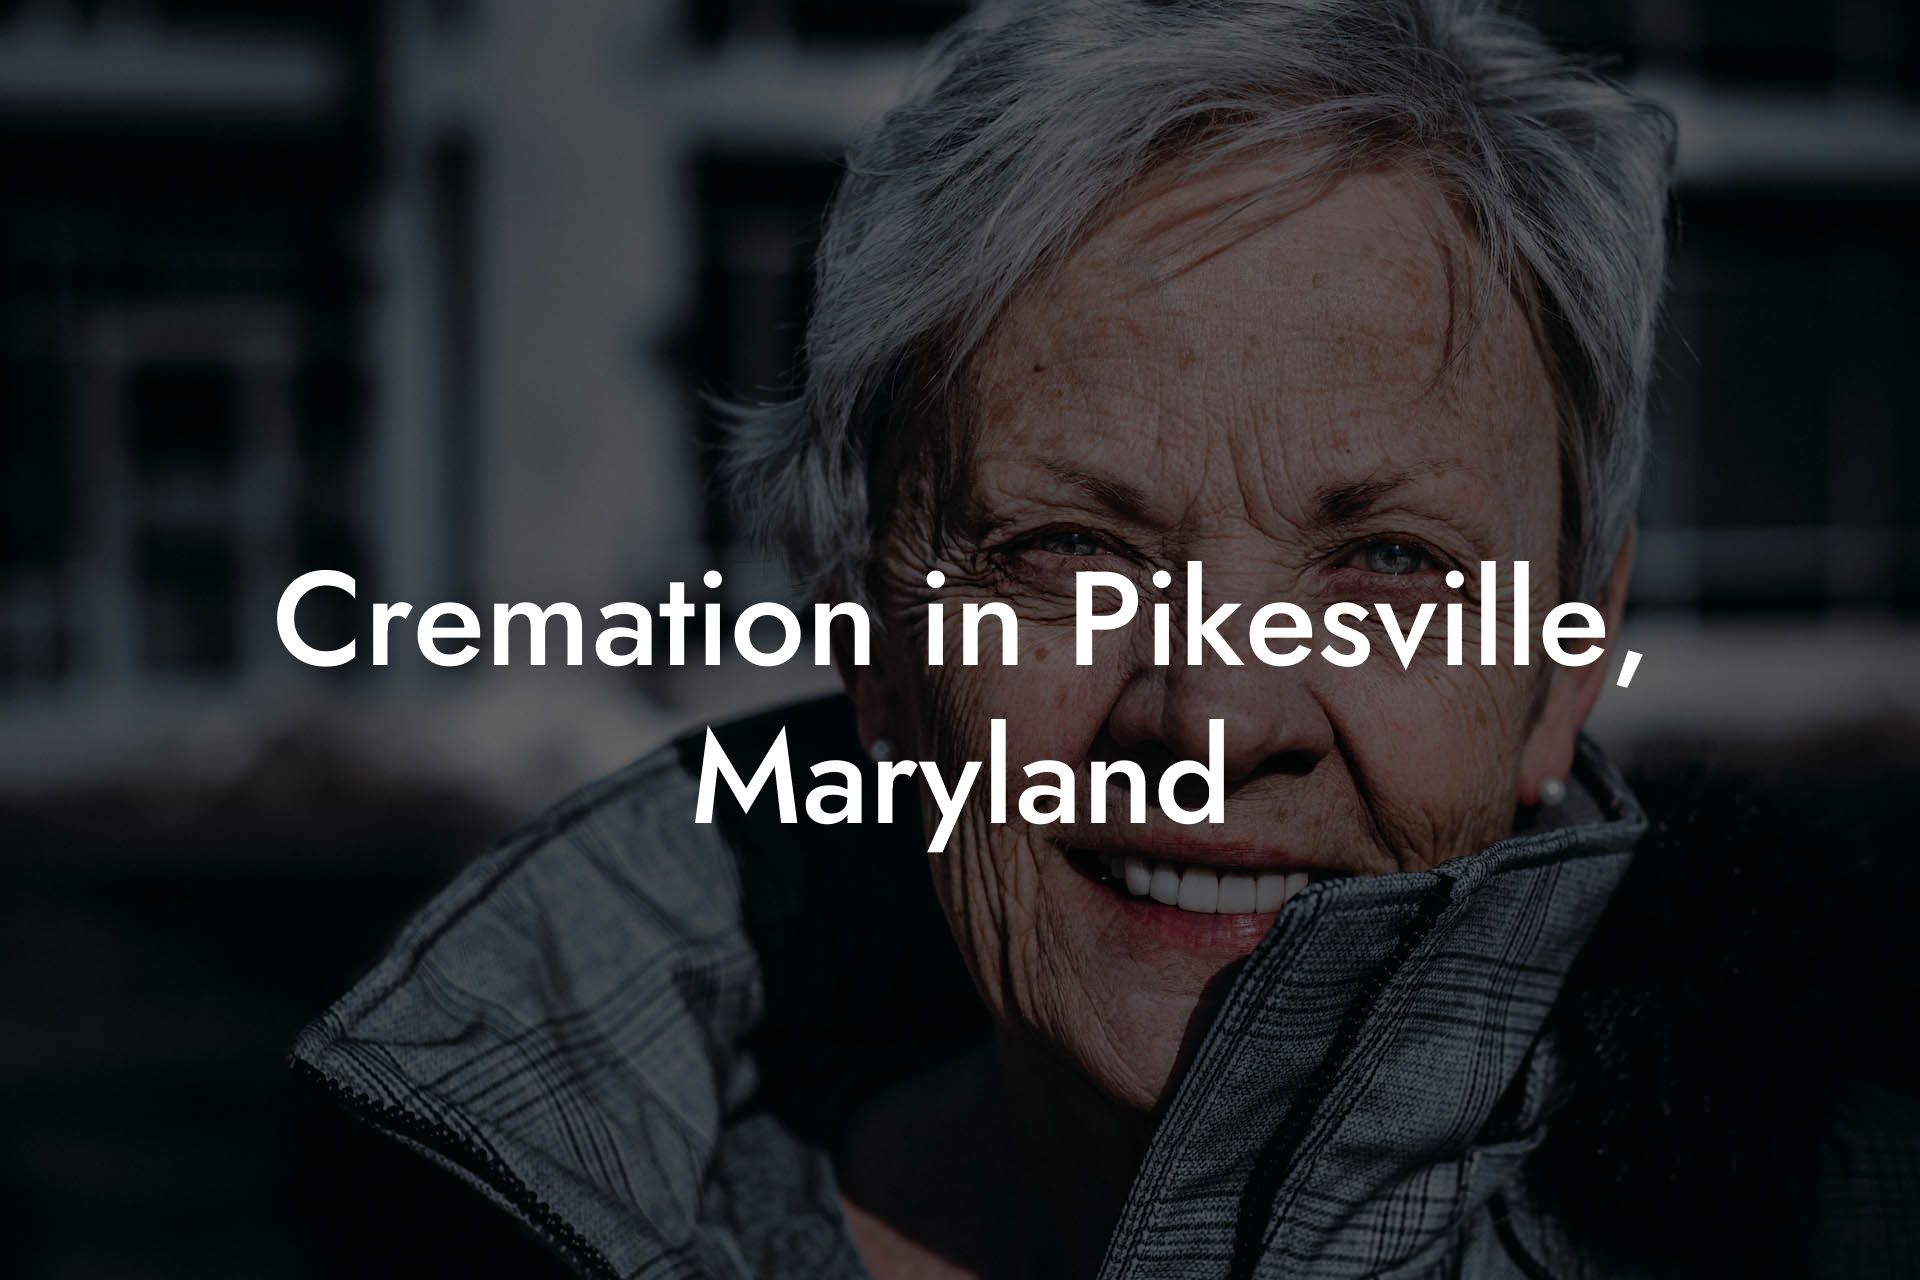 Cremation in Pikesville, Maryland